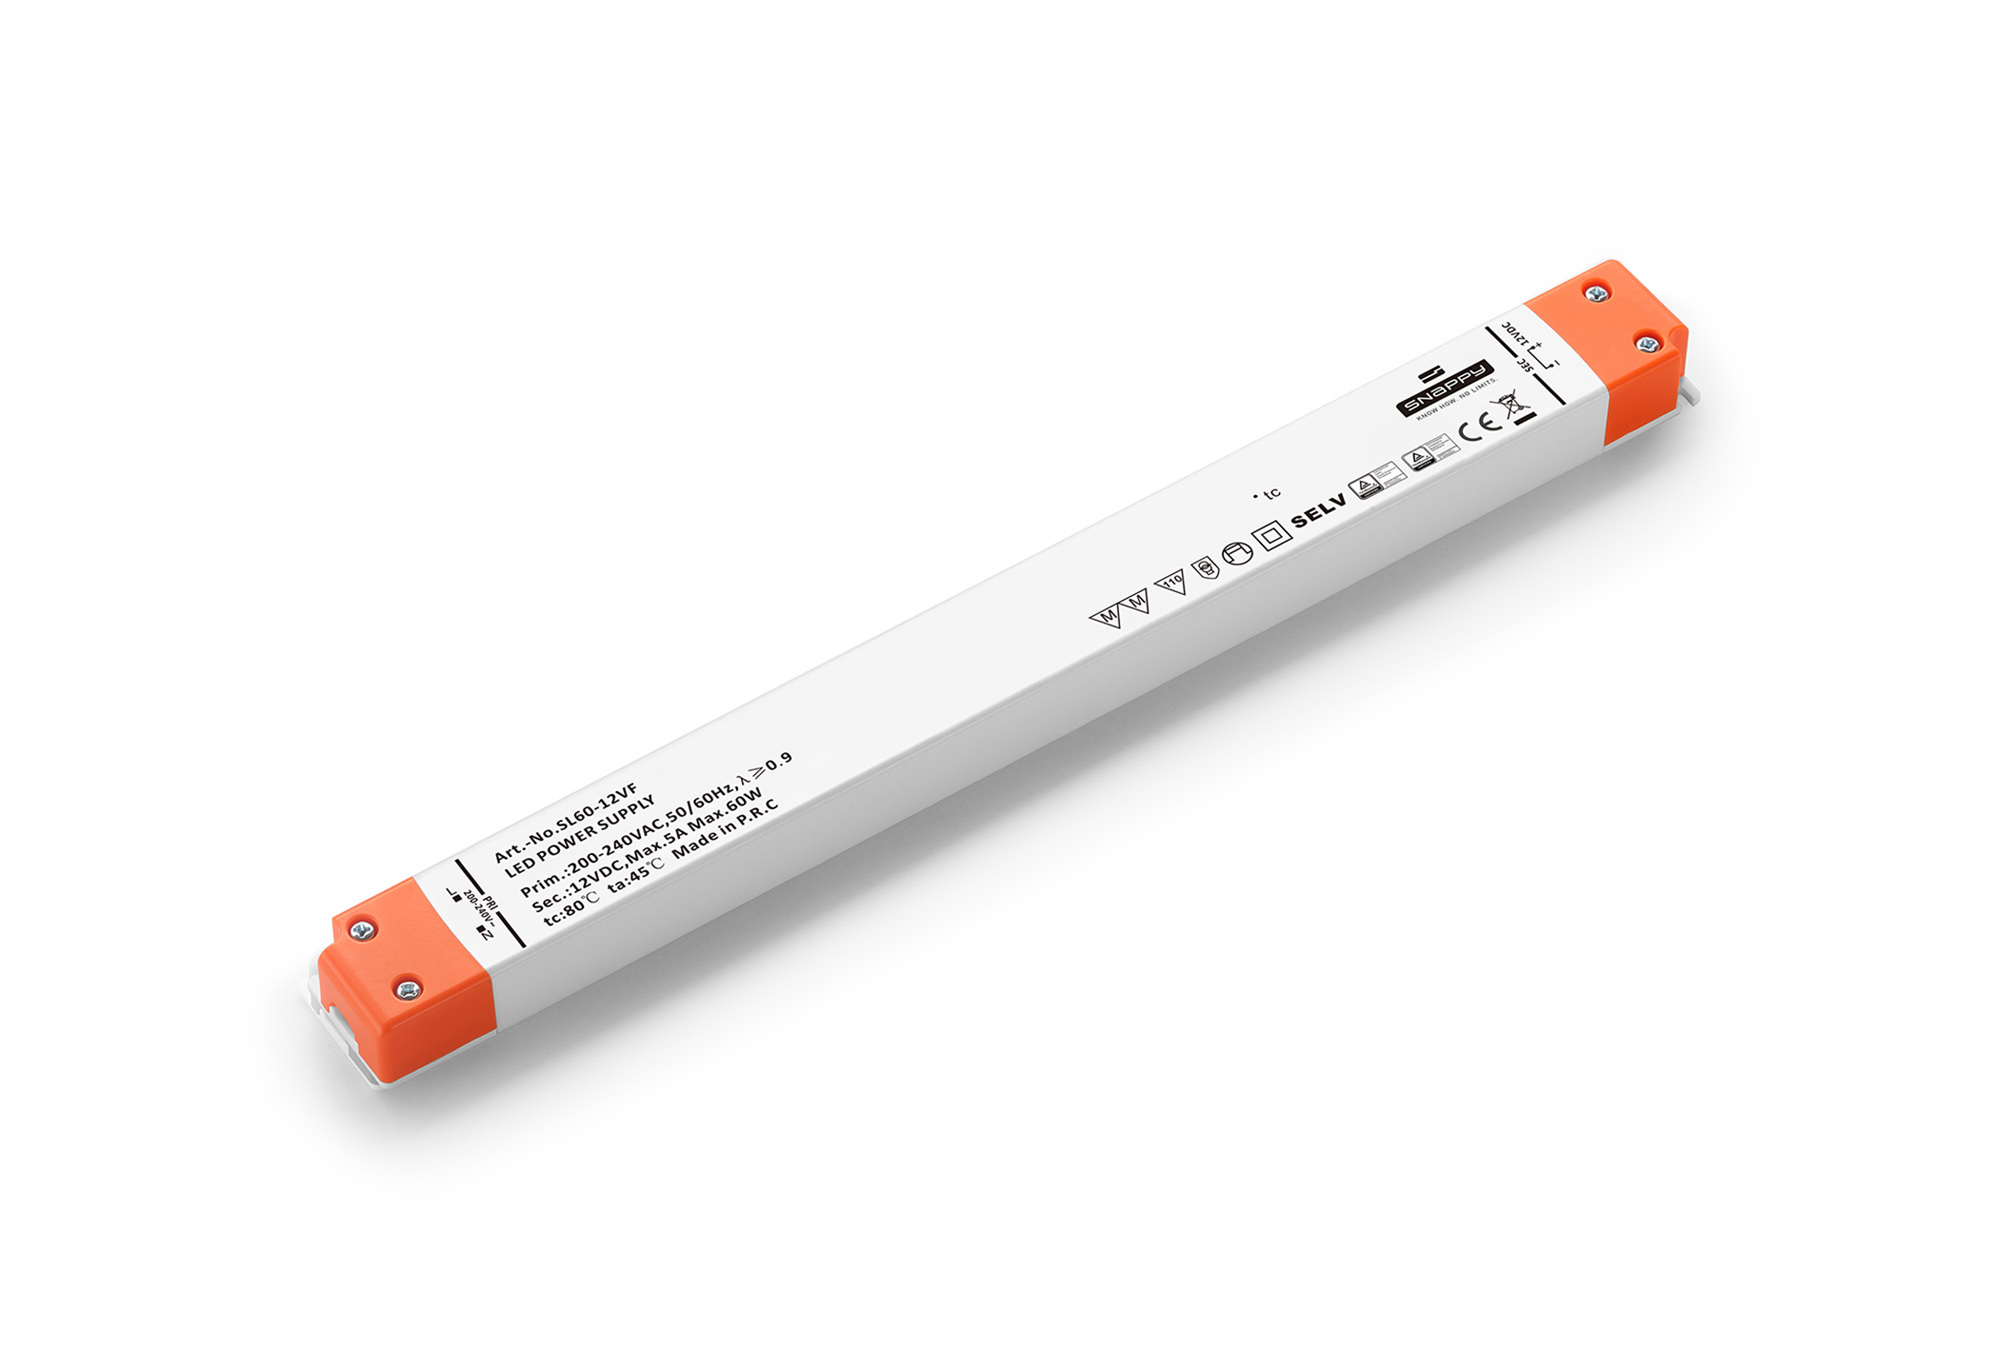 SL60-24VF  60W; Constant Voltage Non Dimmable LED Driver; 24VDC; 2.5A; Input 200-240VAC 50/60Hz; IP20.